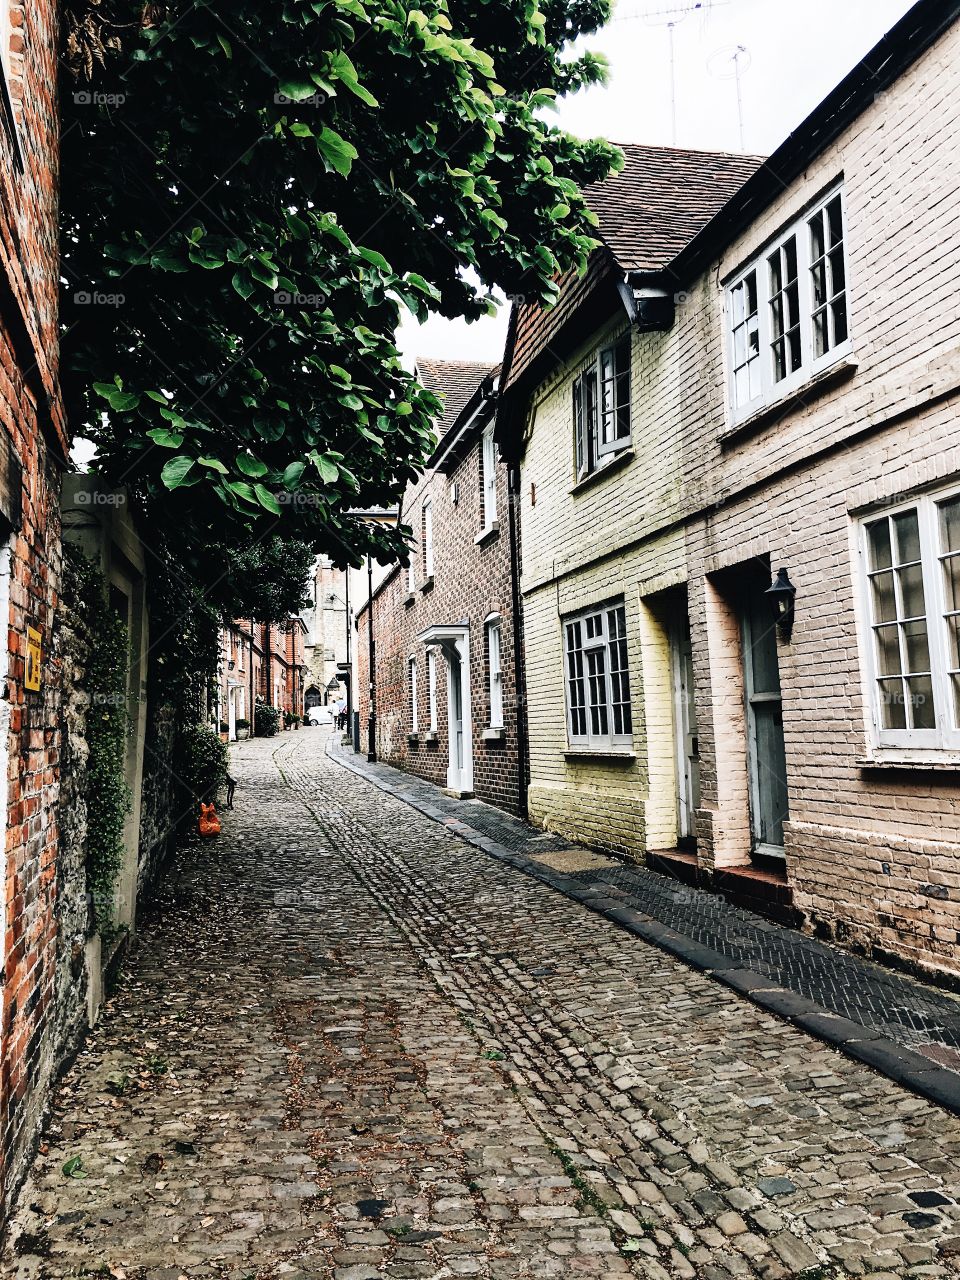 An old cobbled English street, complete with pastel painted houses and shrubbery 